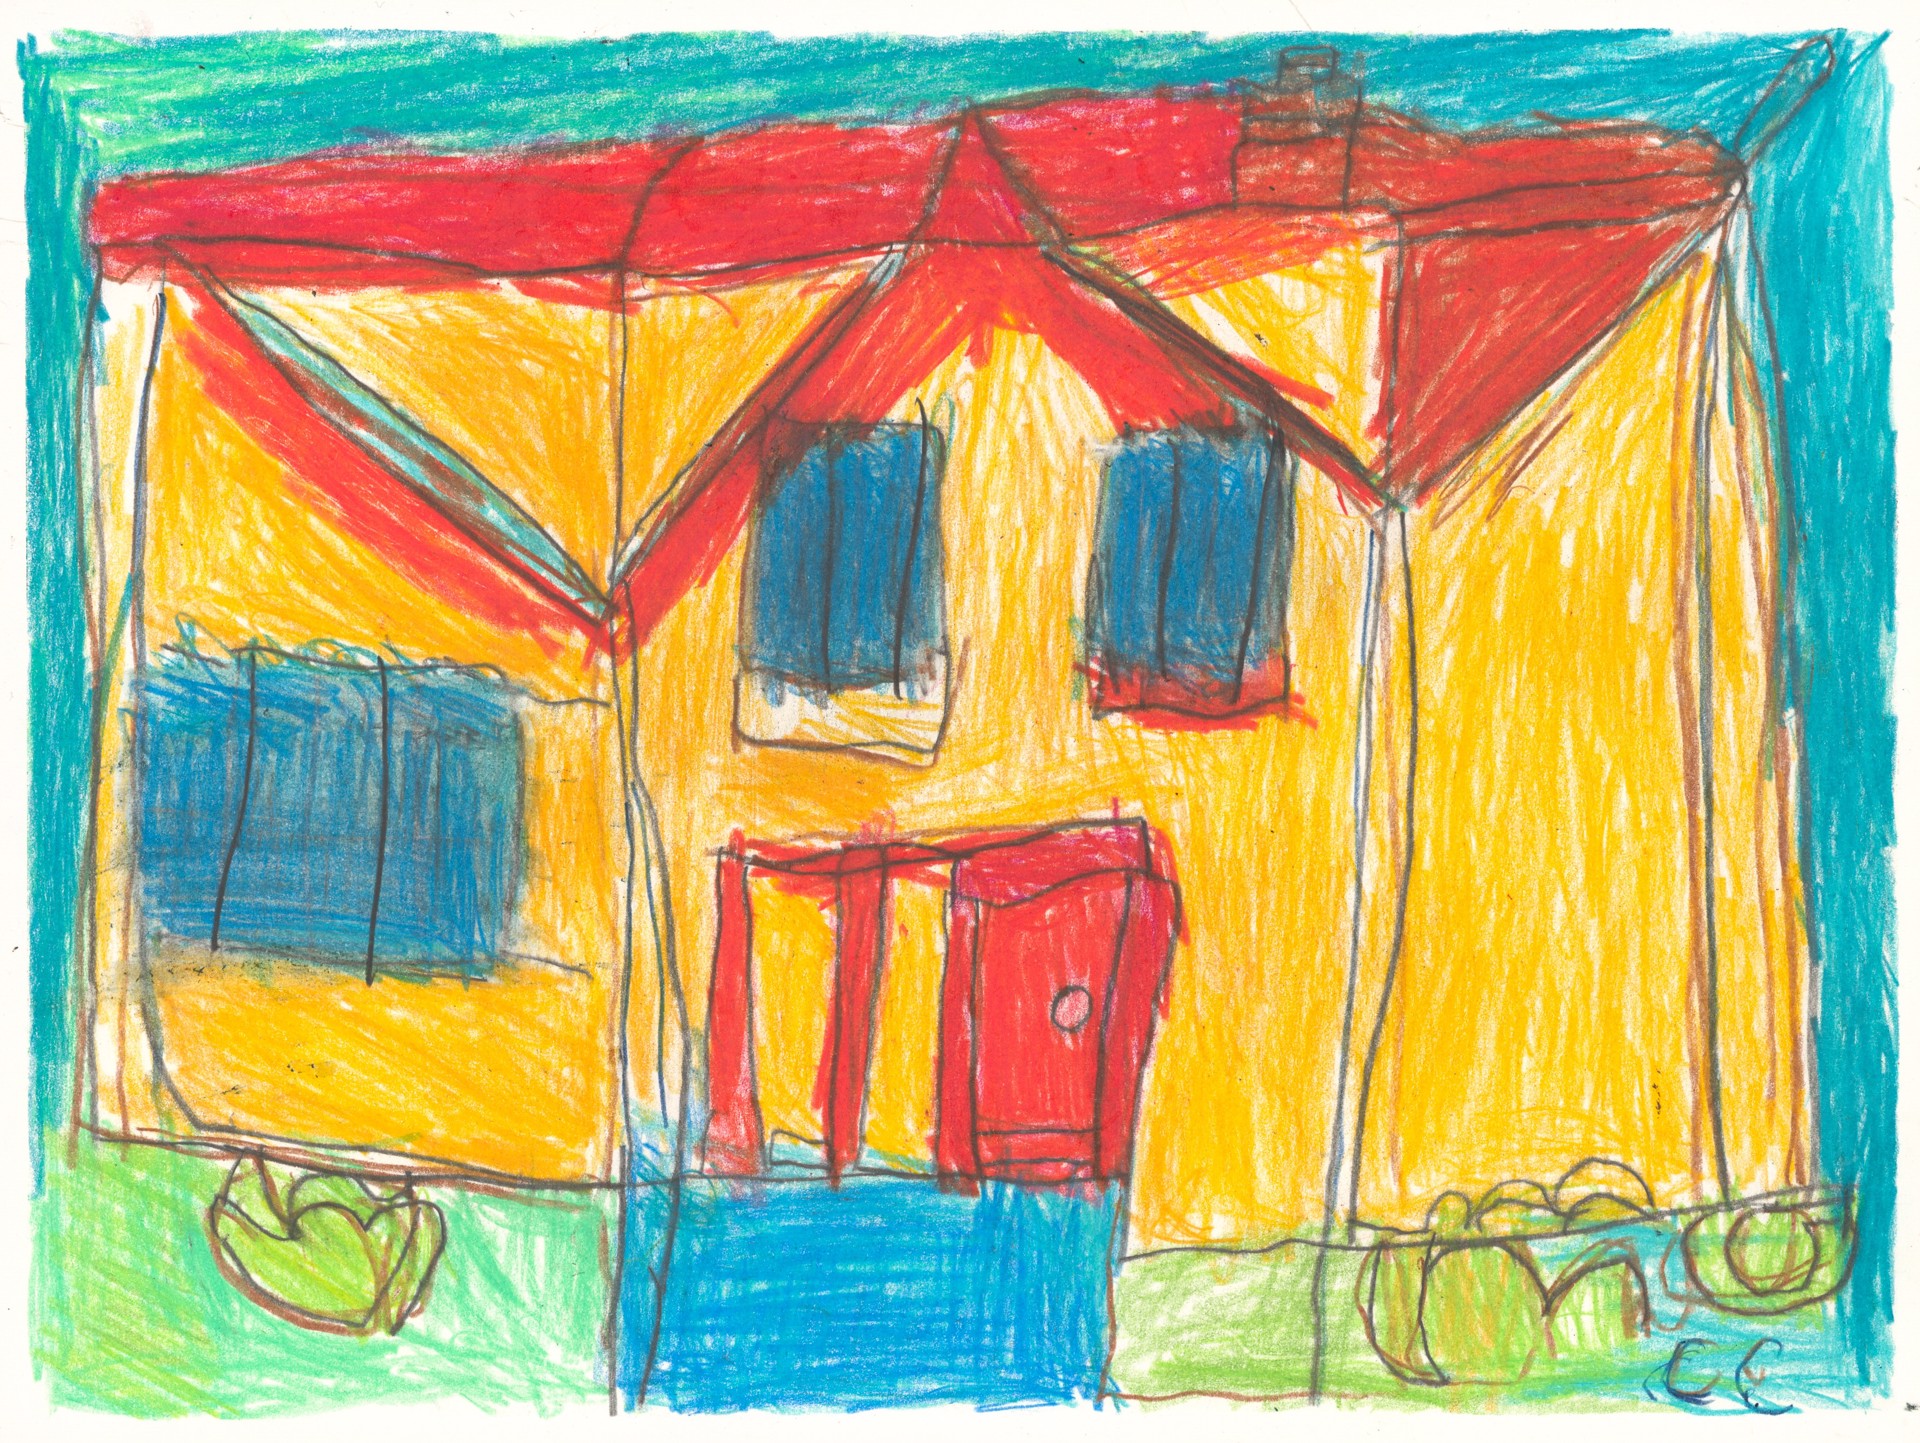 Red and Yellow House by Calvin "Sonny" Clarke